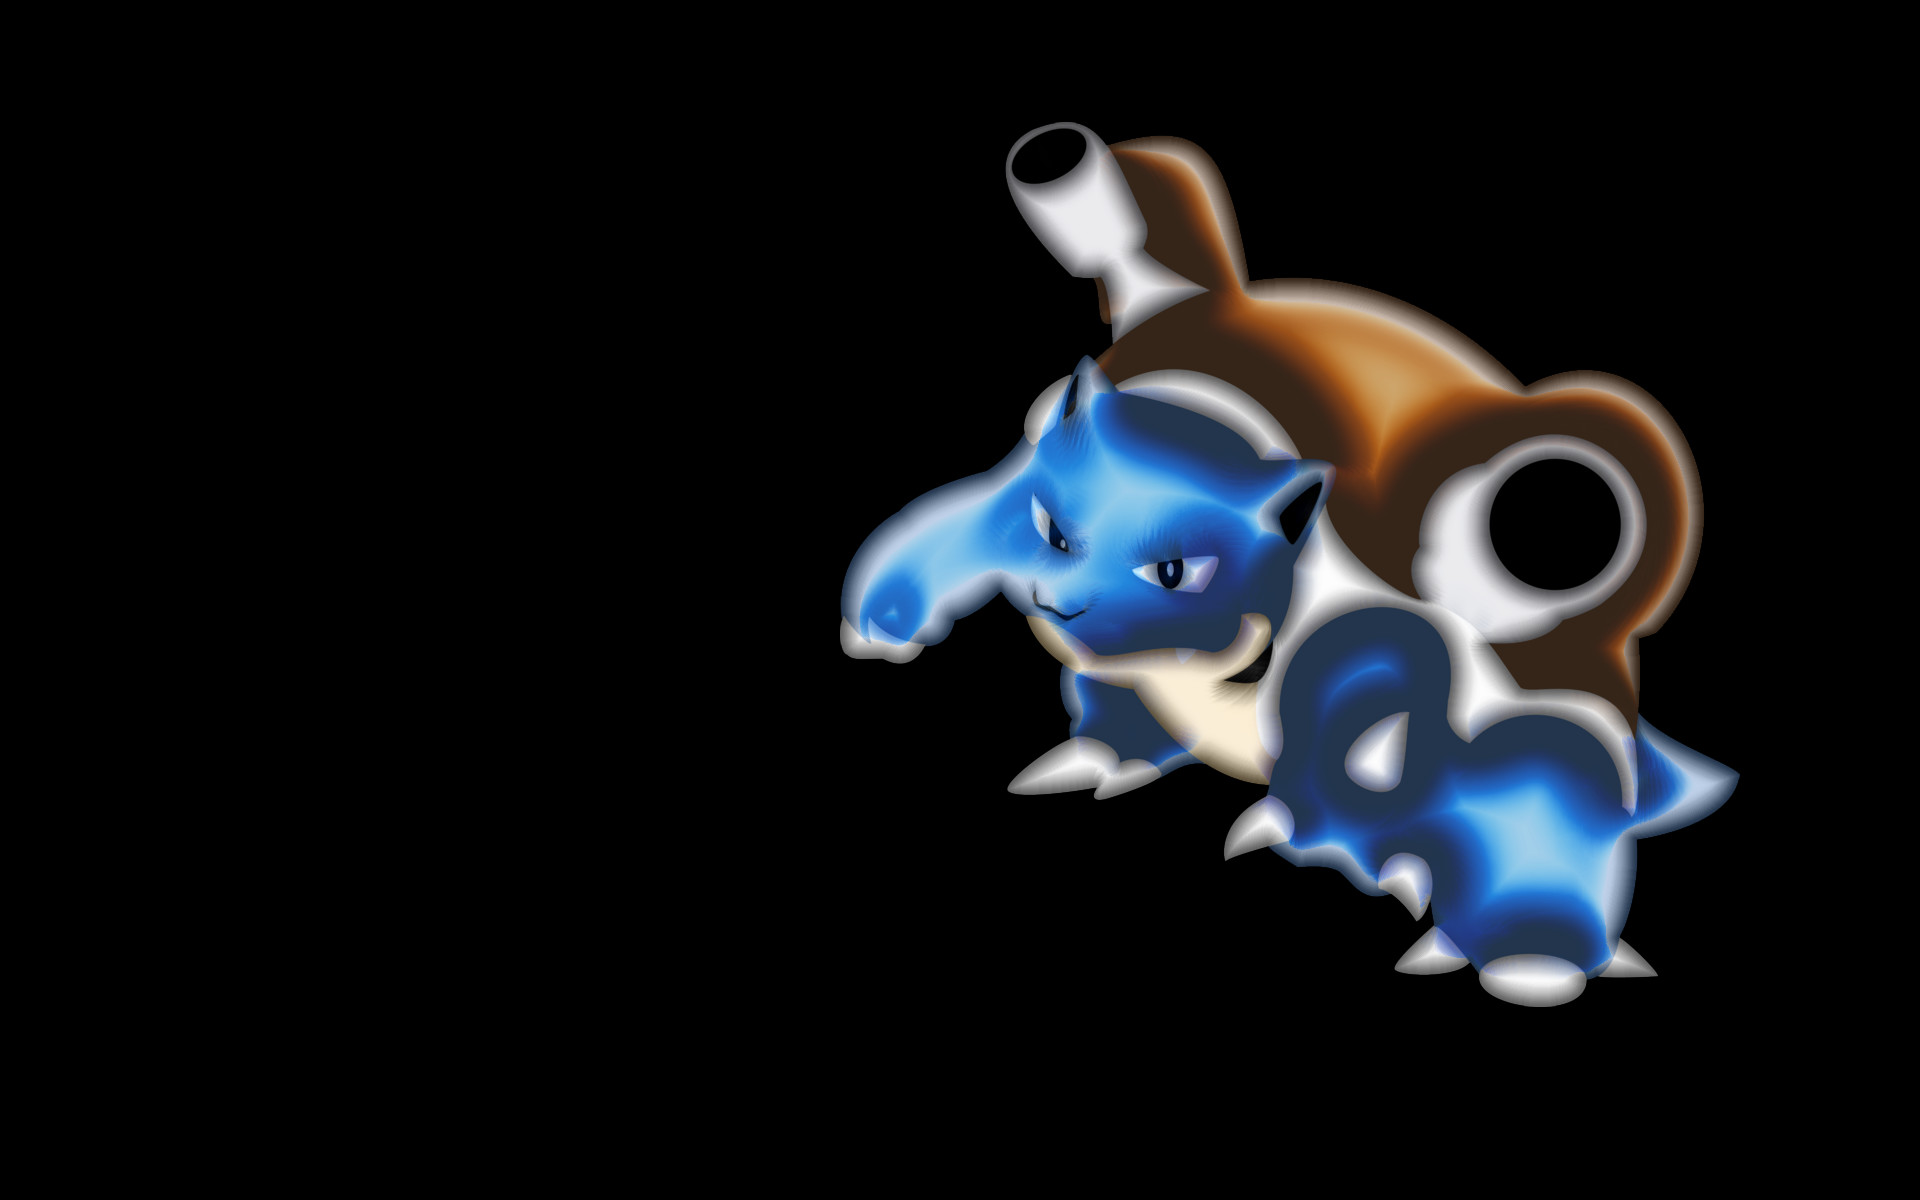 1920x1200 For that Guy that wanted a Blastoise Wallpaper - Imgur